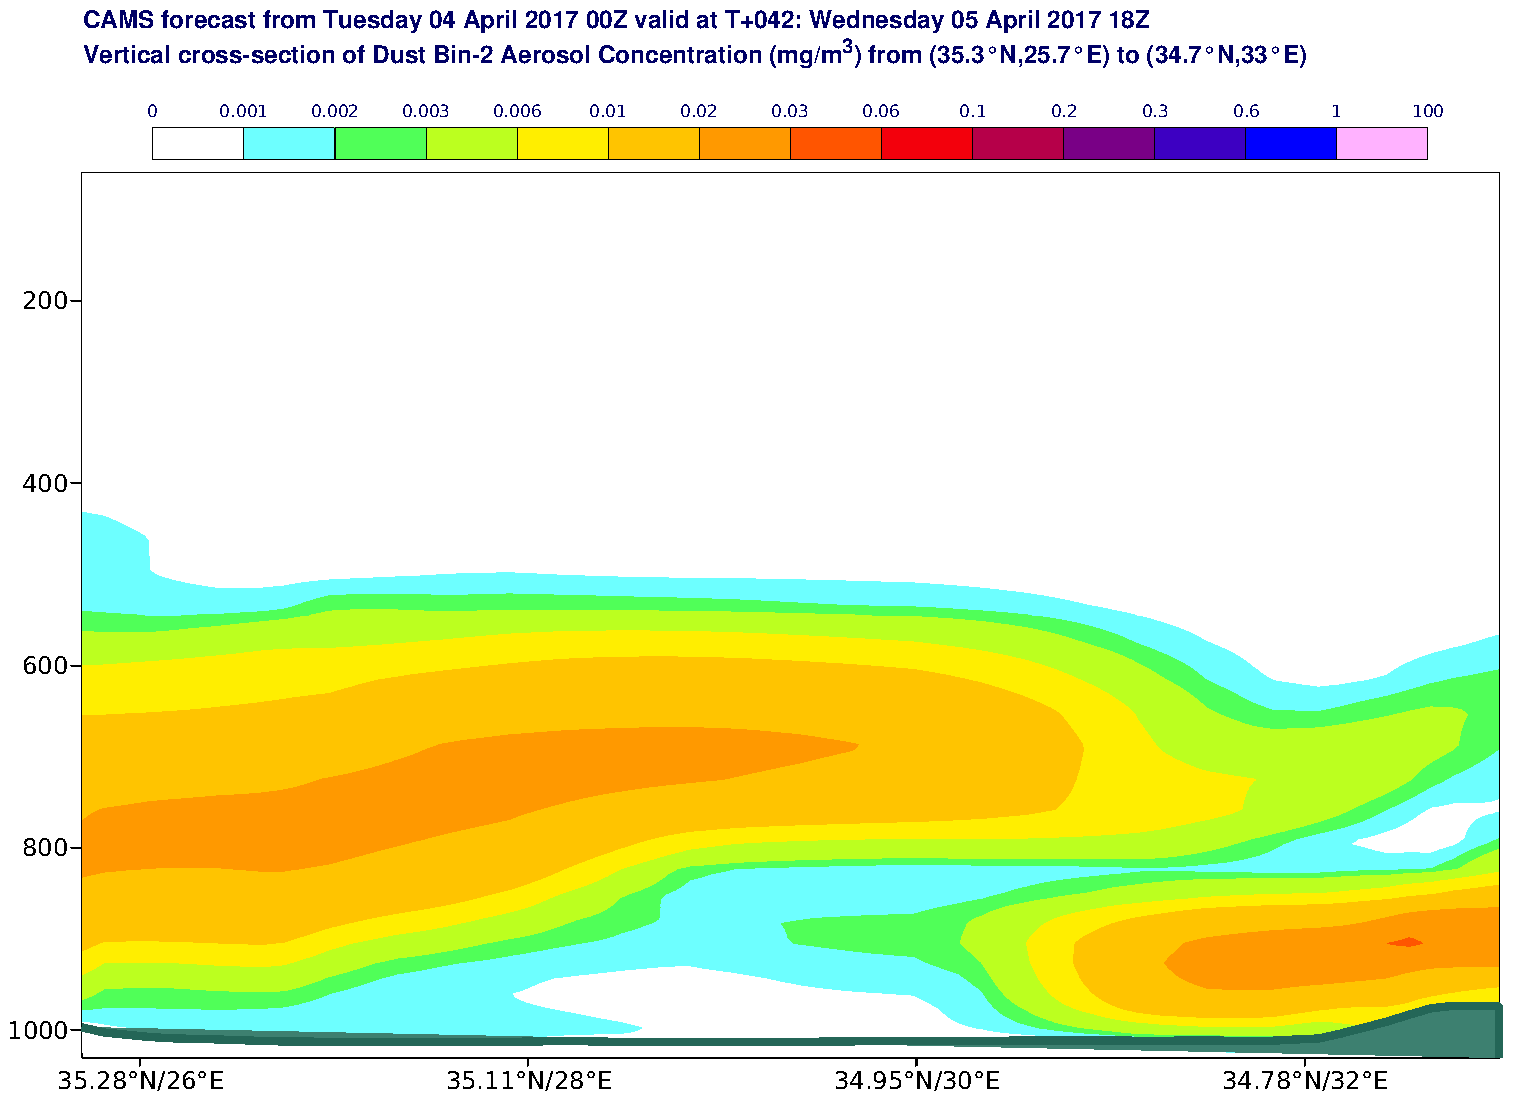 Vertical cross-section of Dust Bin-2 Aerosol Concentration (mg/m3) valid at T42 - 2017-04-05 18:00